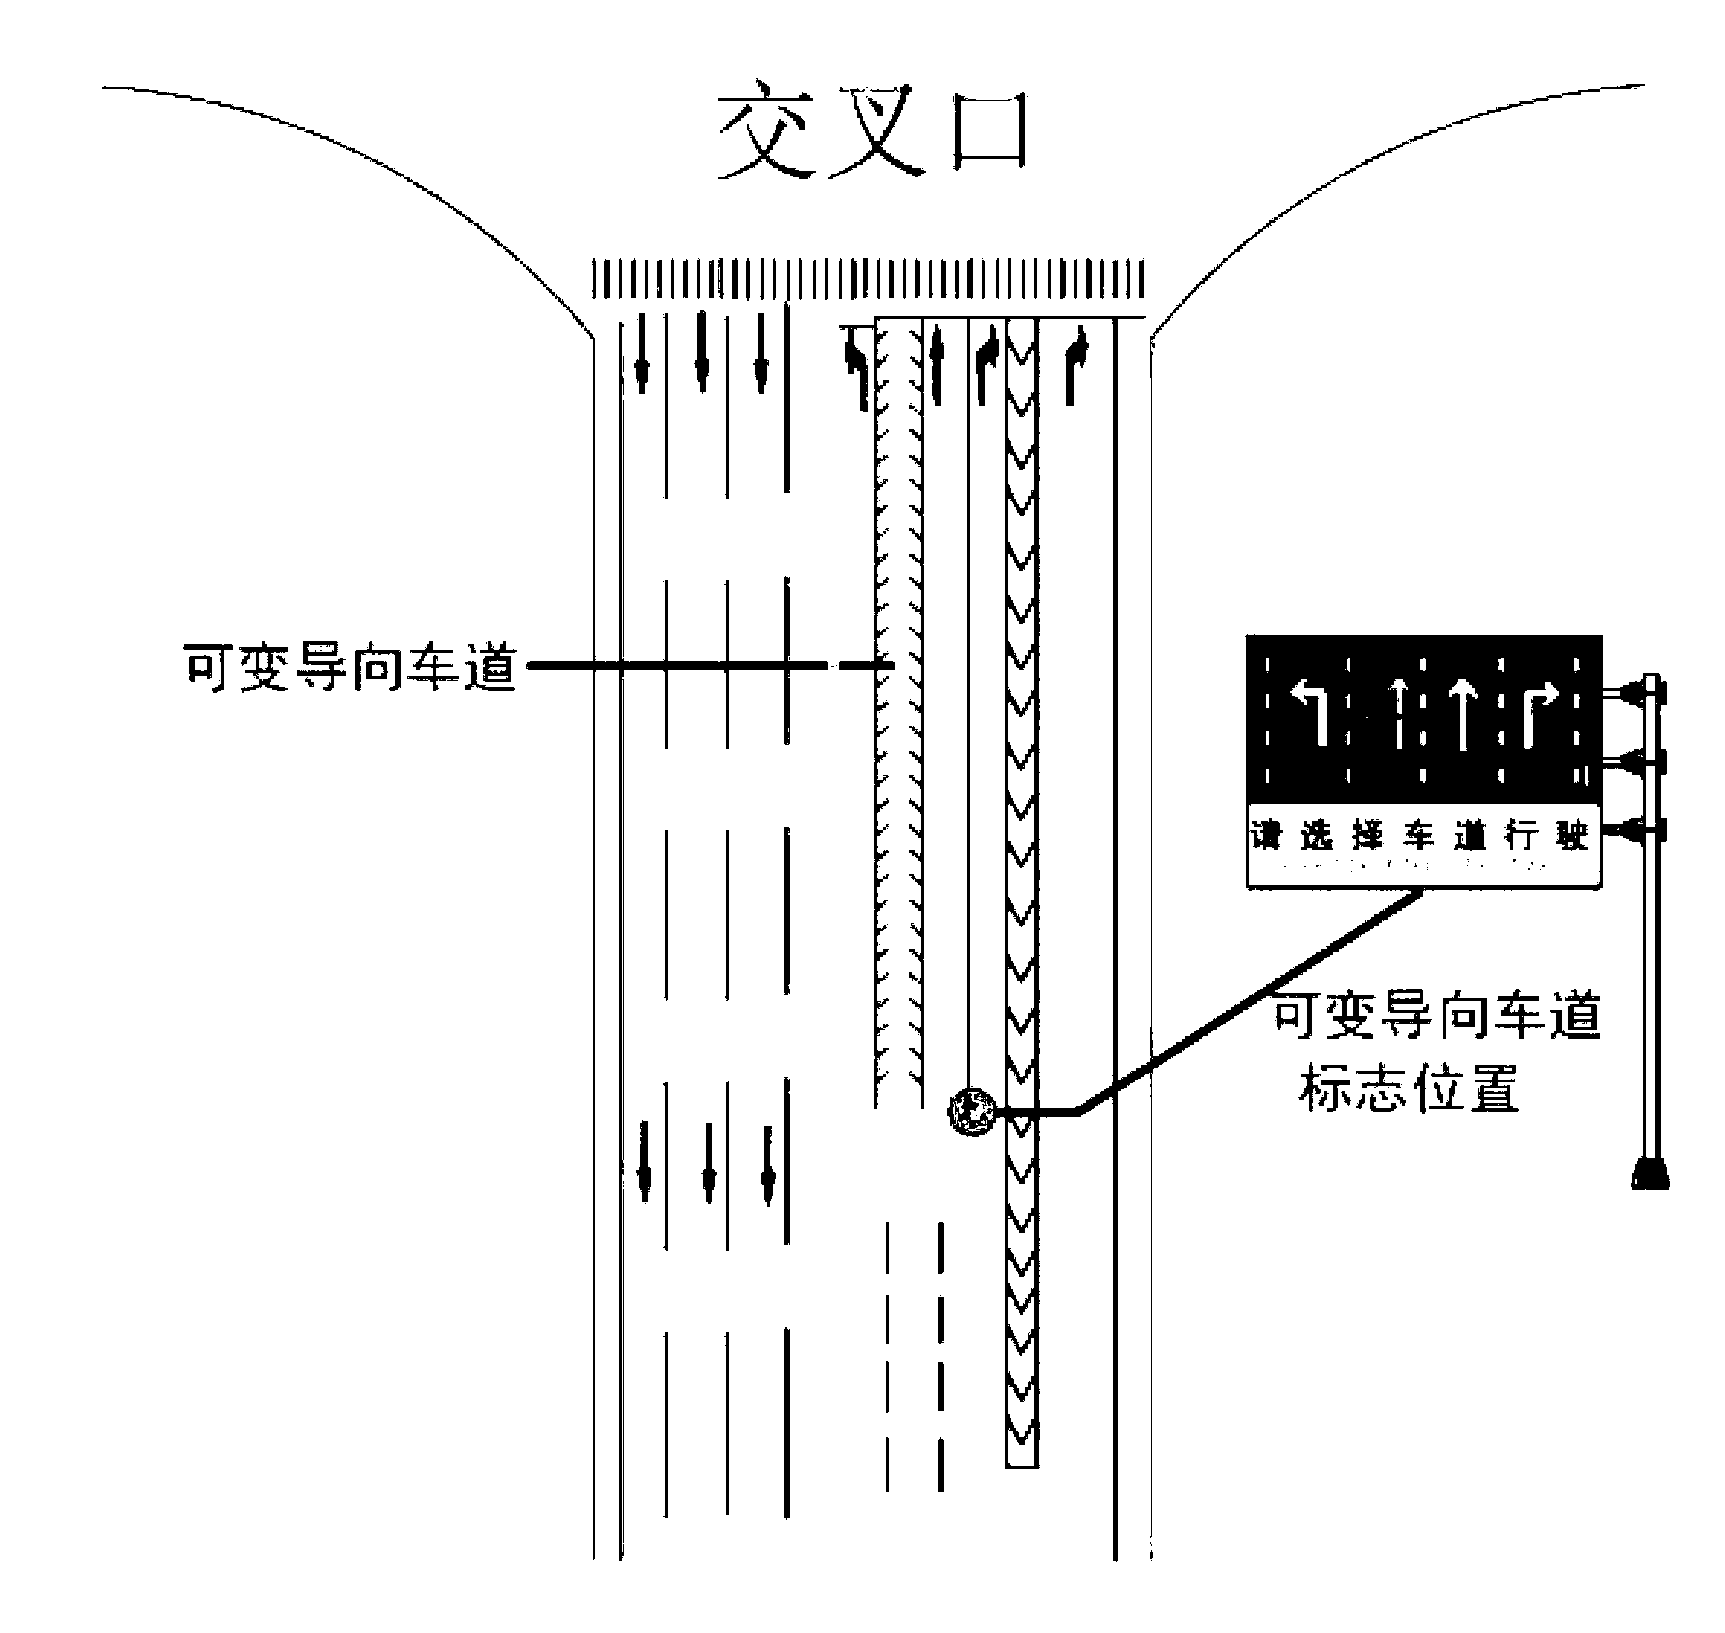 Method for determining length of variable guide lane for signal control intersection approach